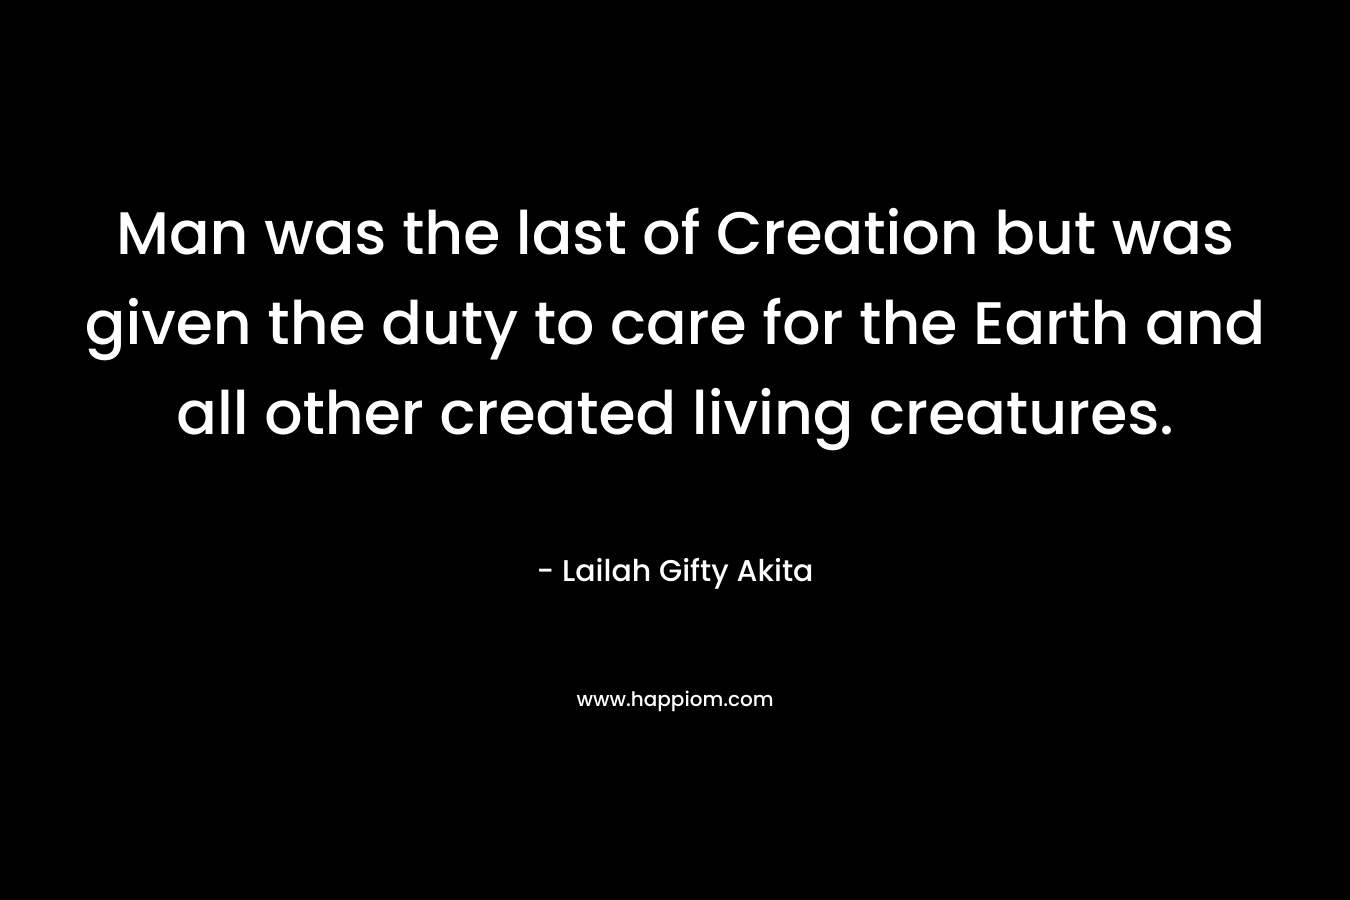 Man was the last of Creation but was given the duty to care for the Earth and all other created living creatures.